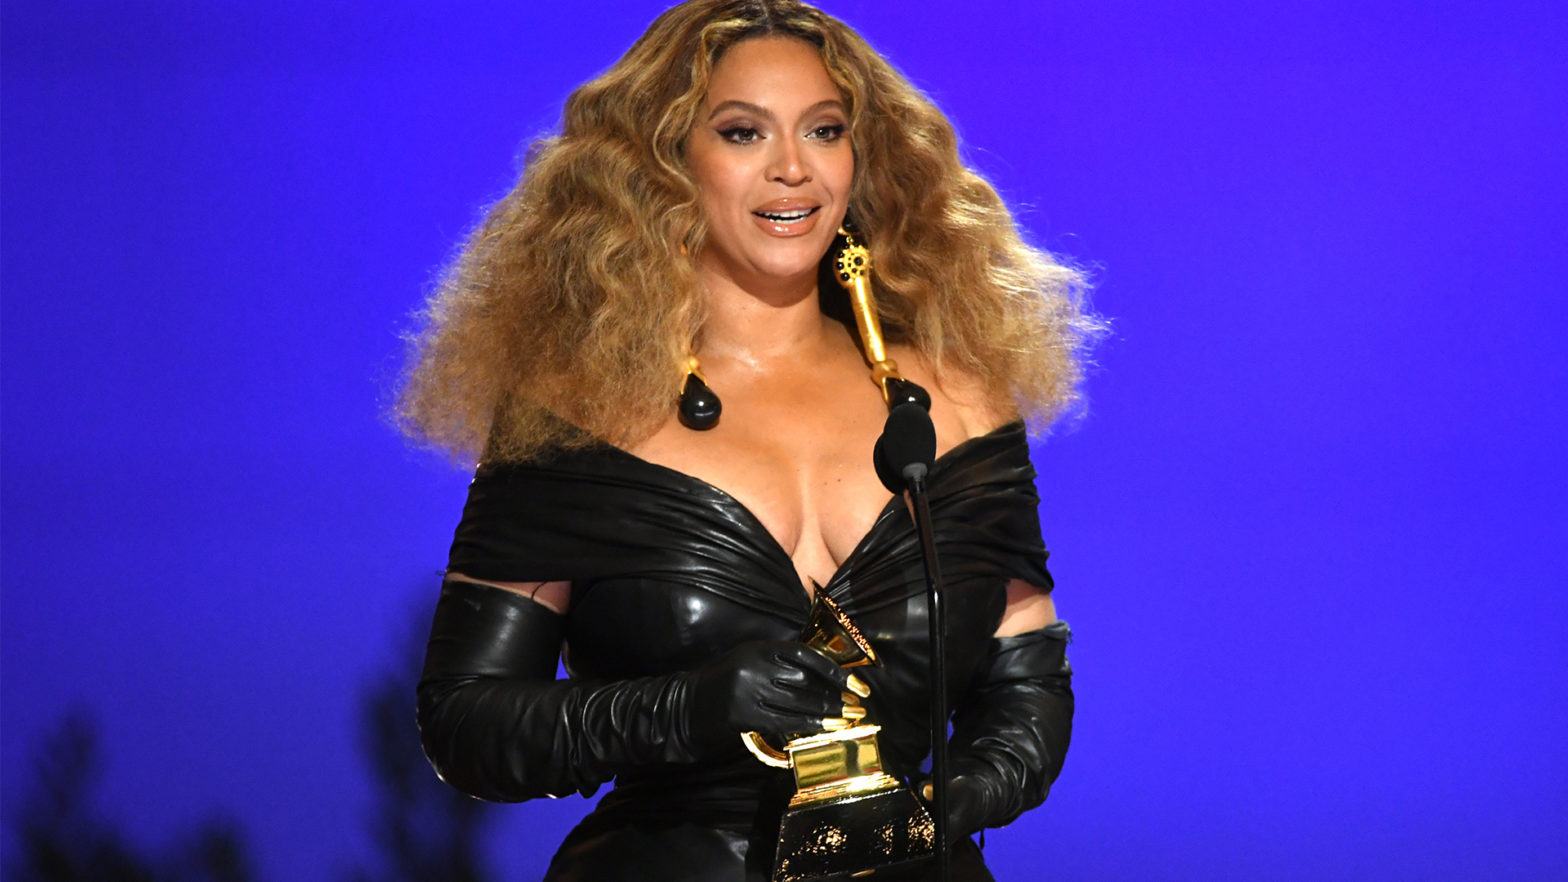 Beyoncé's BeyGOOD Foundation Commits $2M To Students And Small Businesses